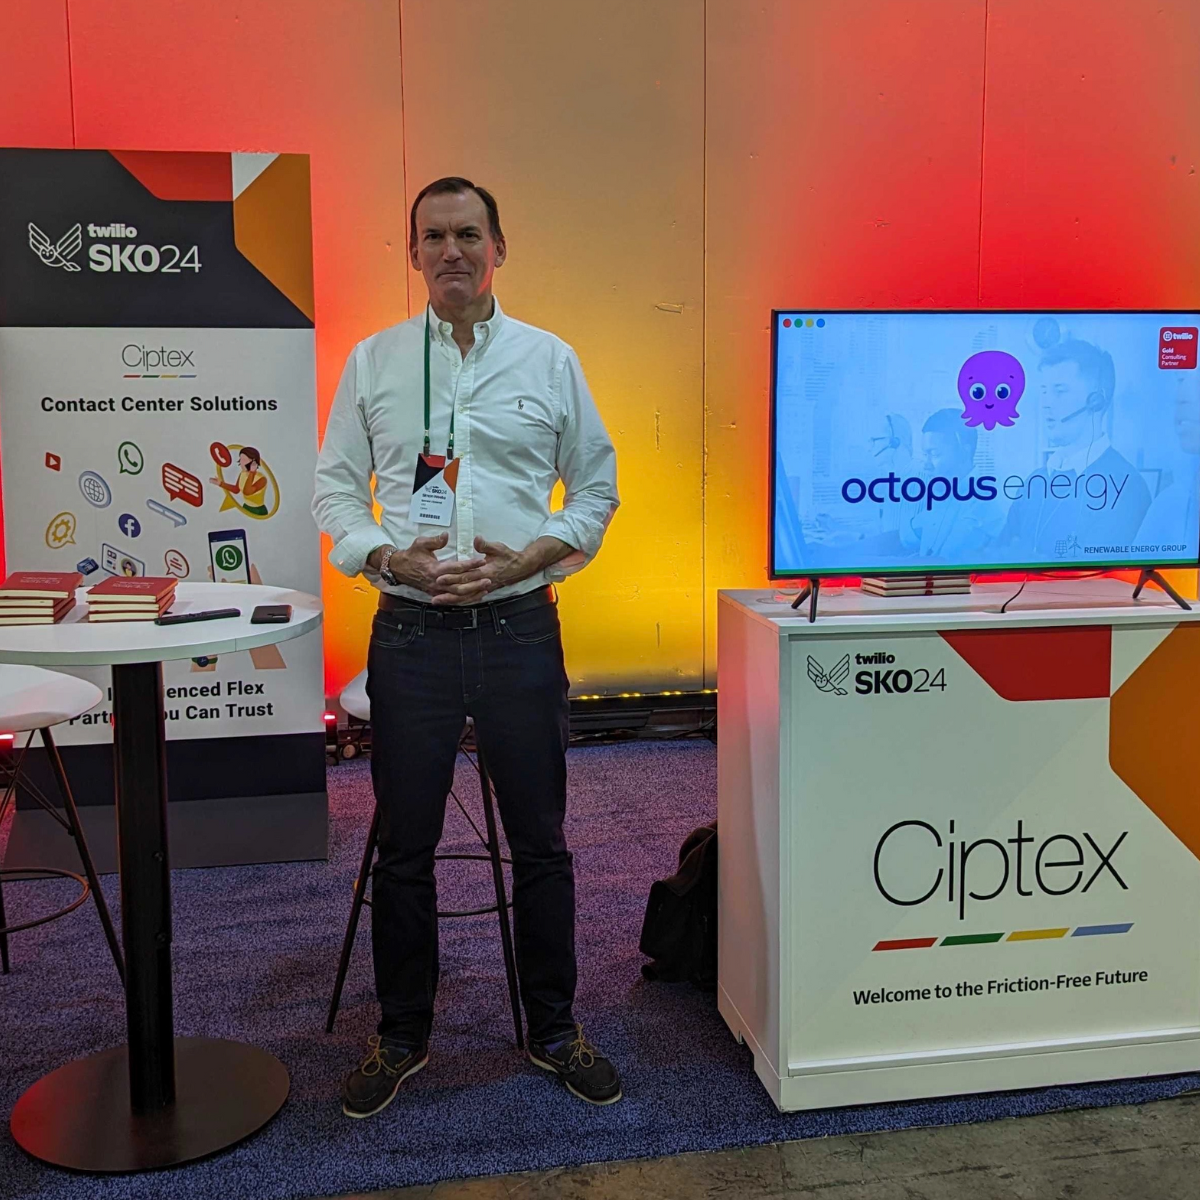 Twilio Sales Kick-Off 2024. Twilio SKO2024 Ciptex stand with Ciptex's CEO stood infront of the Ciptex stand.